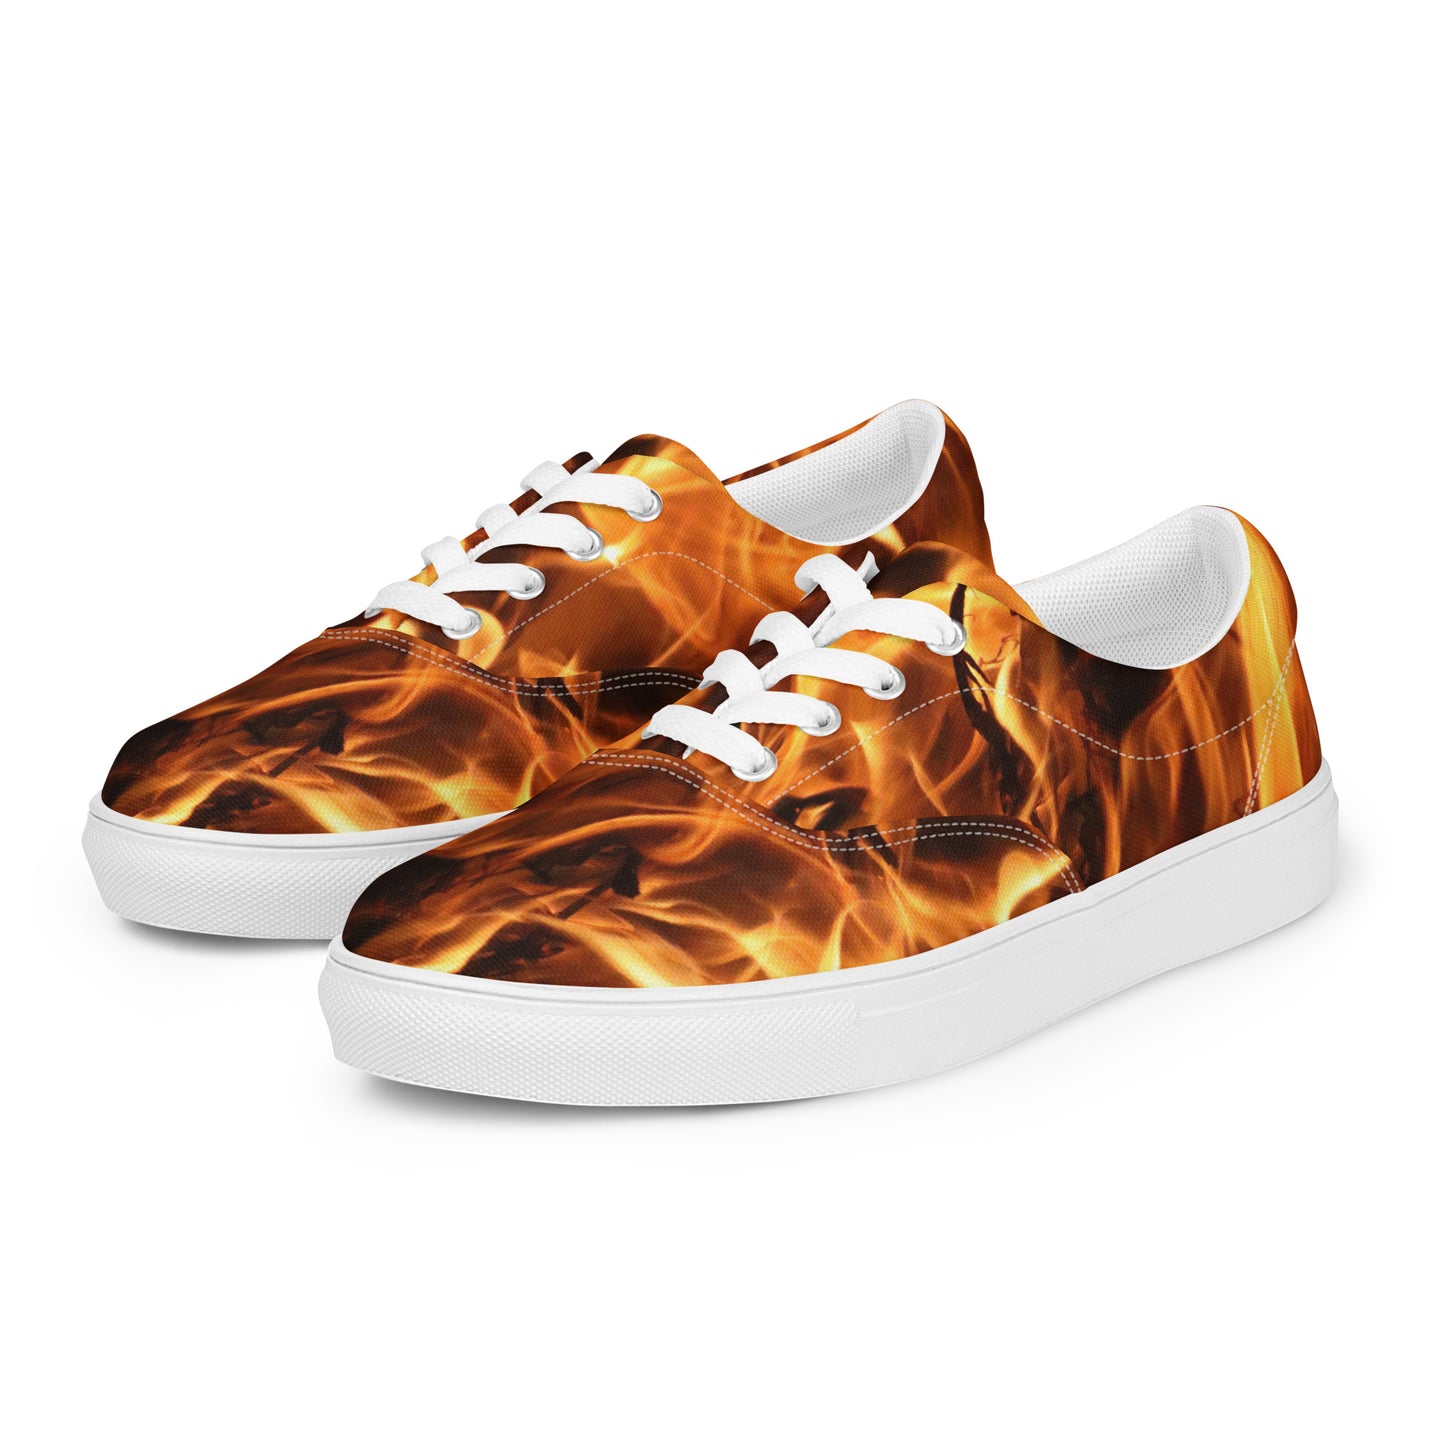 Fire Spirits Women’s lace-up canvas shoes - "Walk Your Talk"